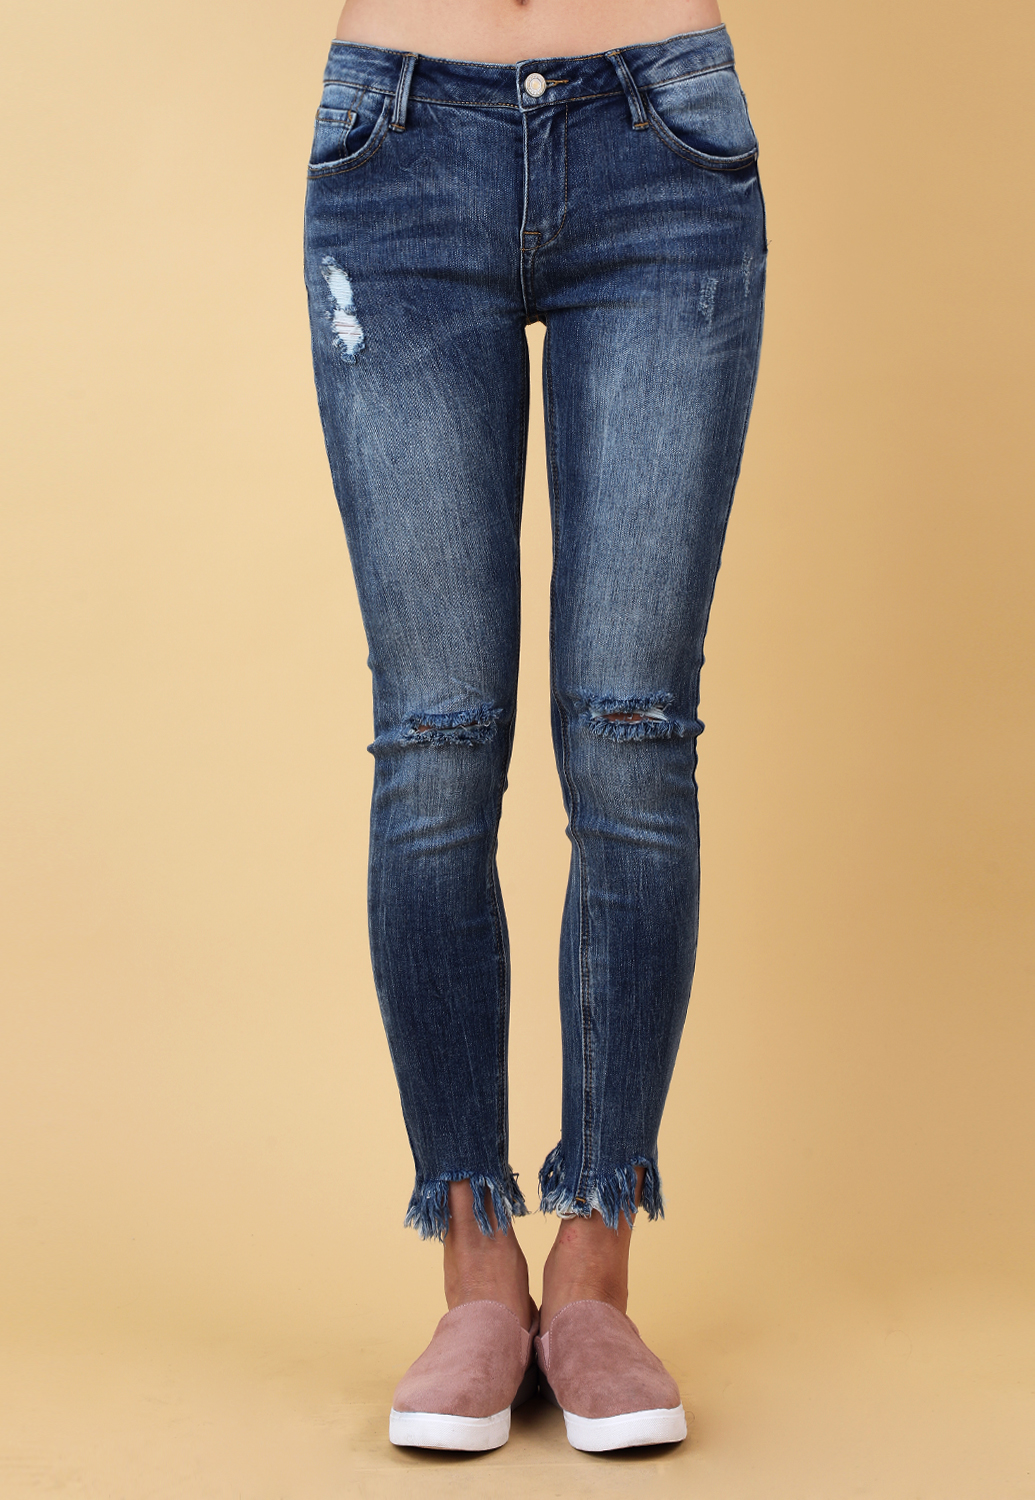 Distressed Fringe Accented Skinny Jeans